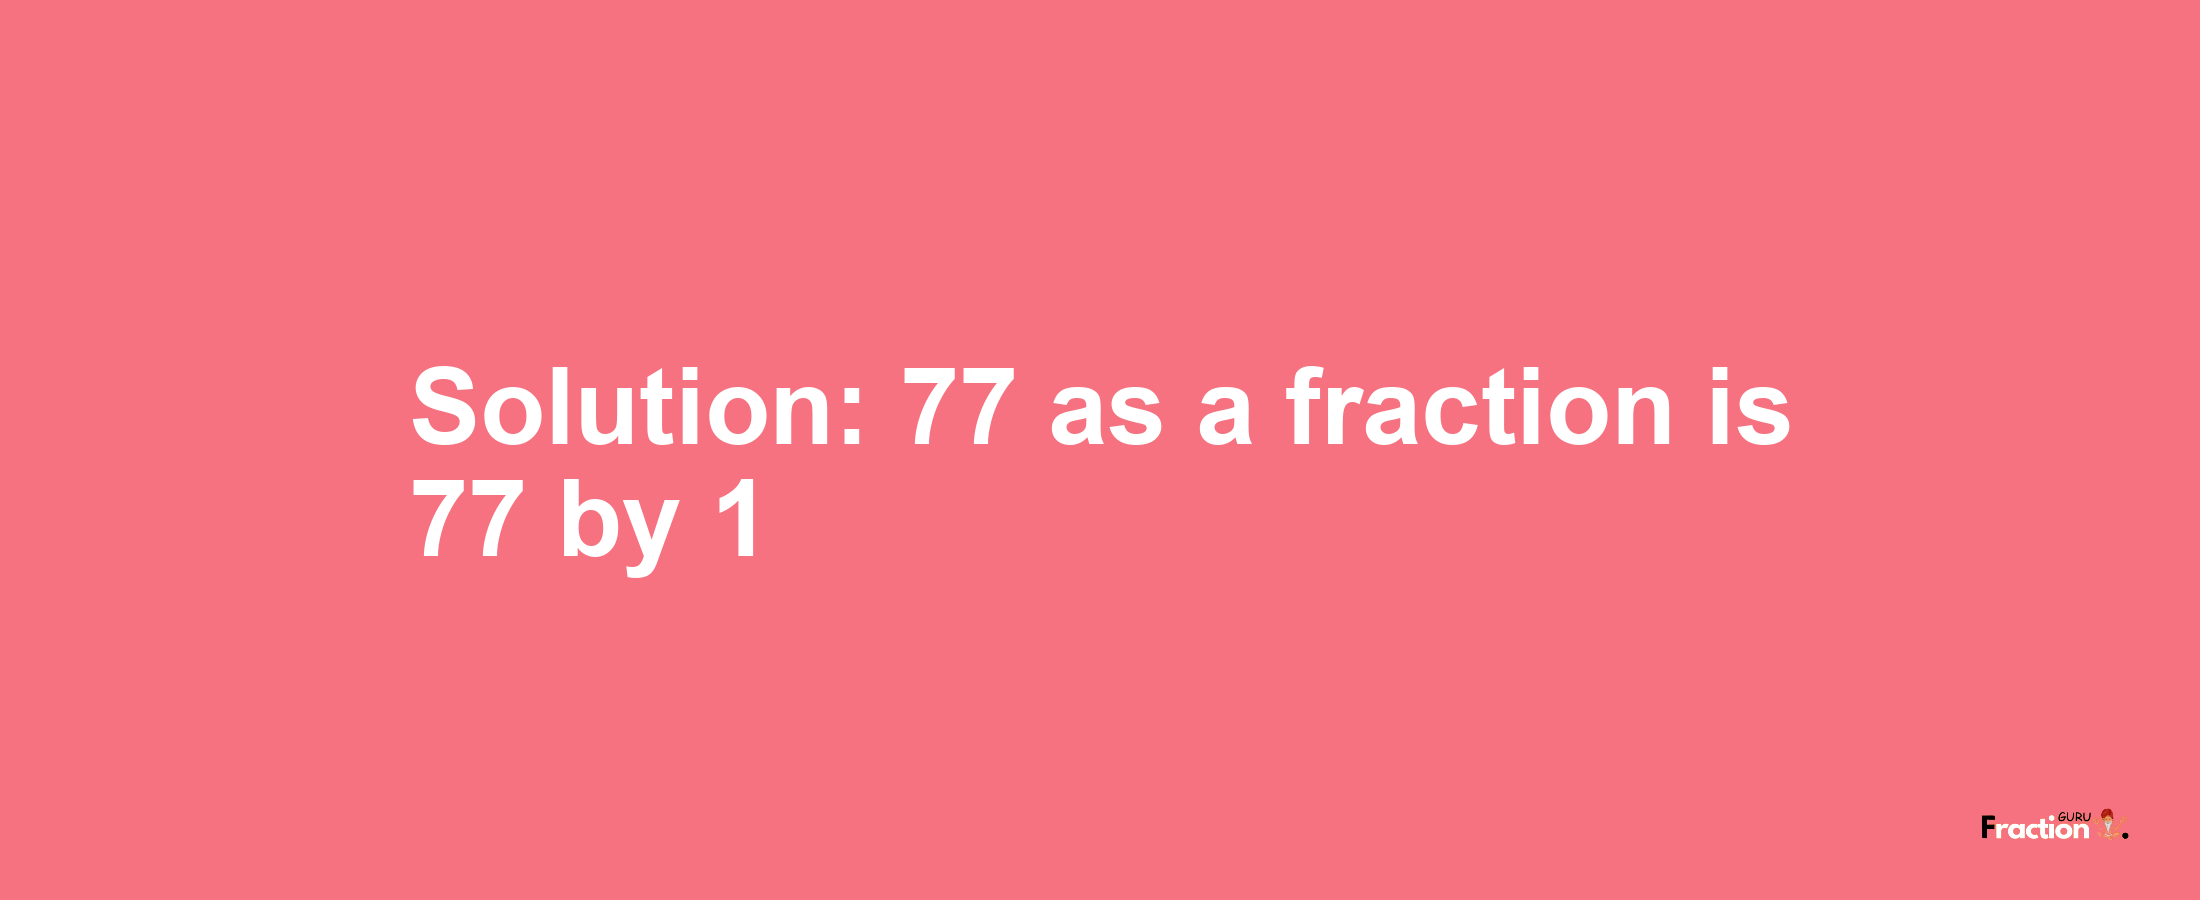 Solution:77 as a fraction is 77/1